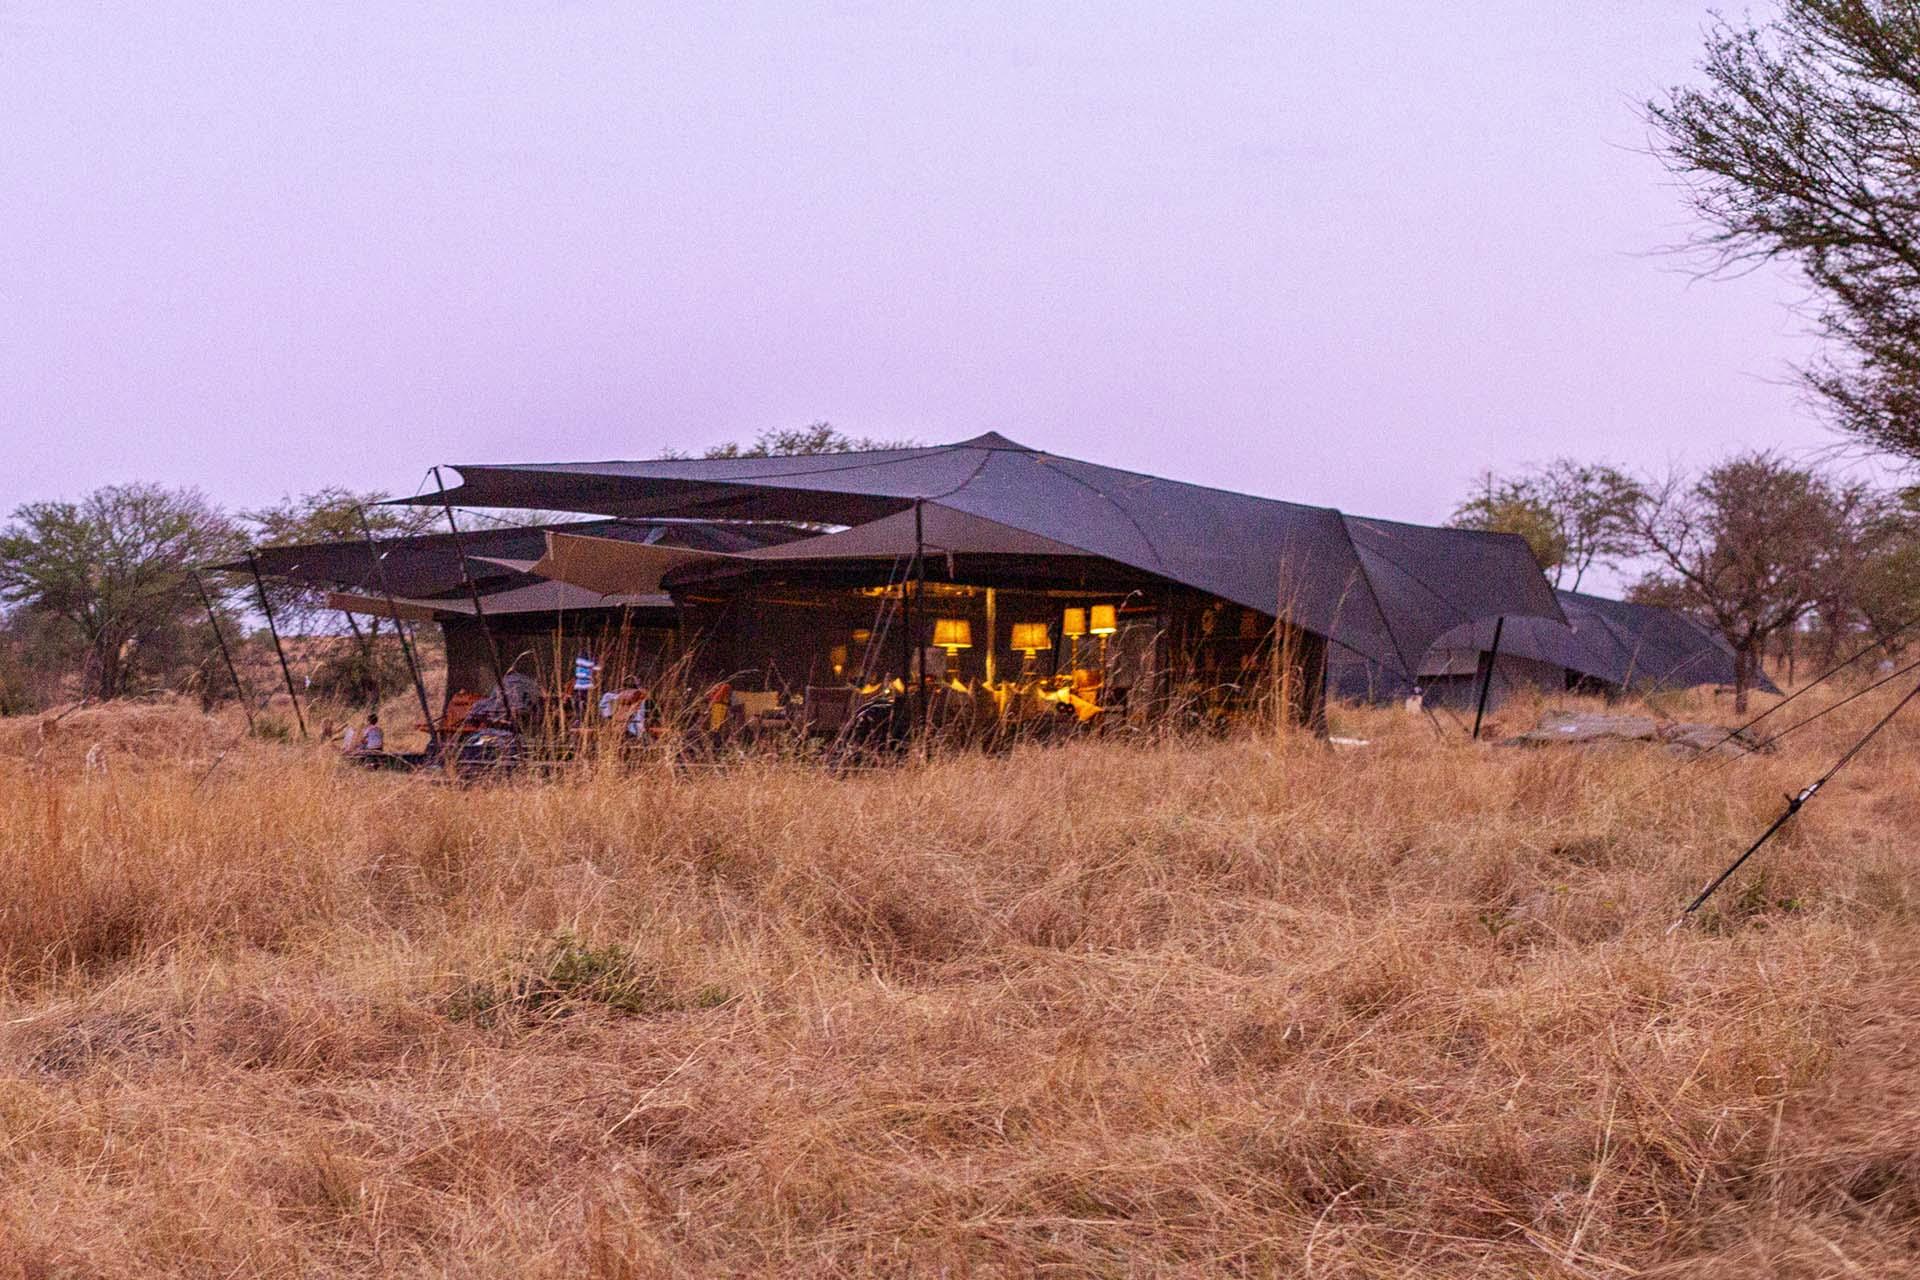 Safari in the south with Siringit is an intimate experience bringing you closer to nature